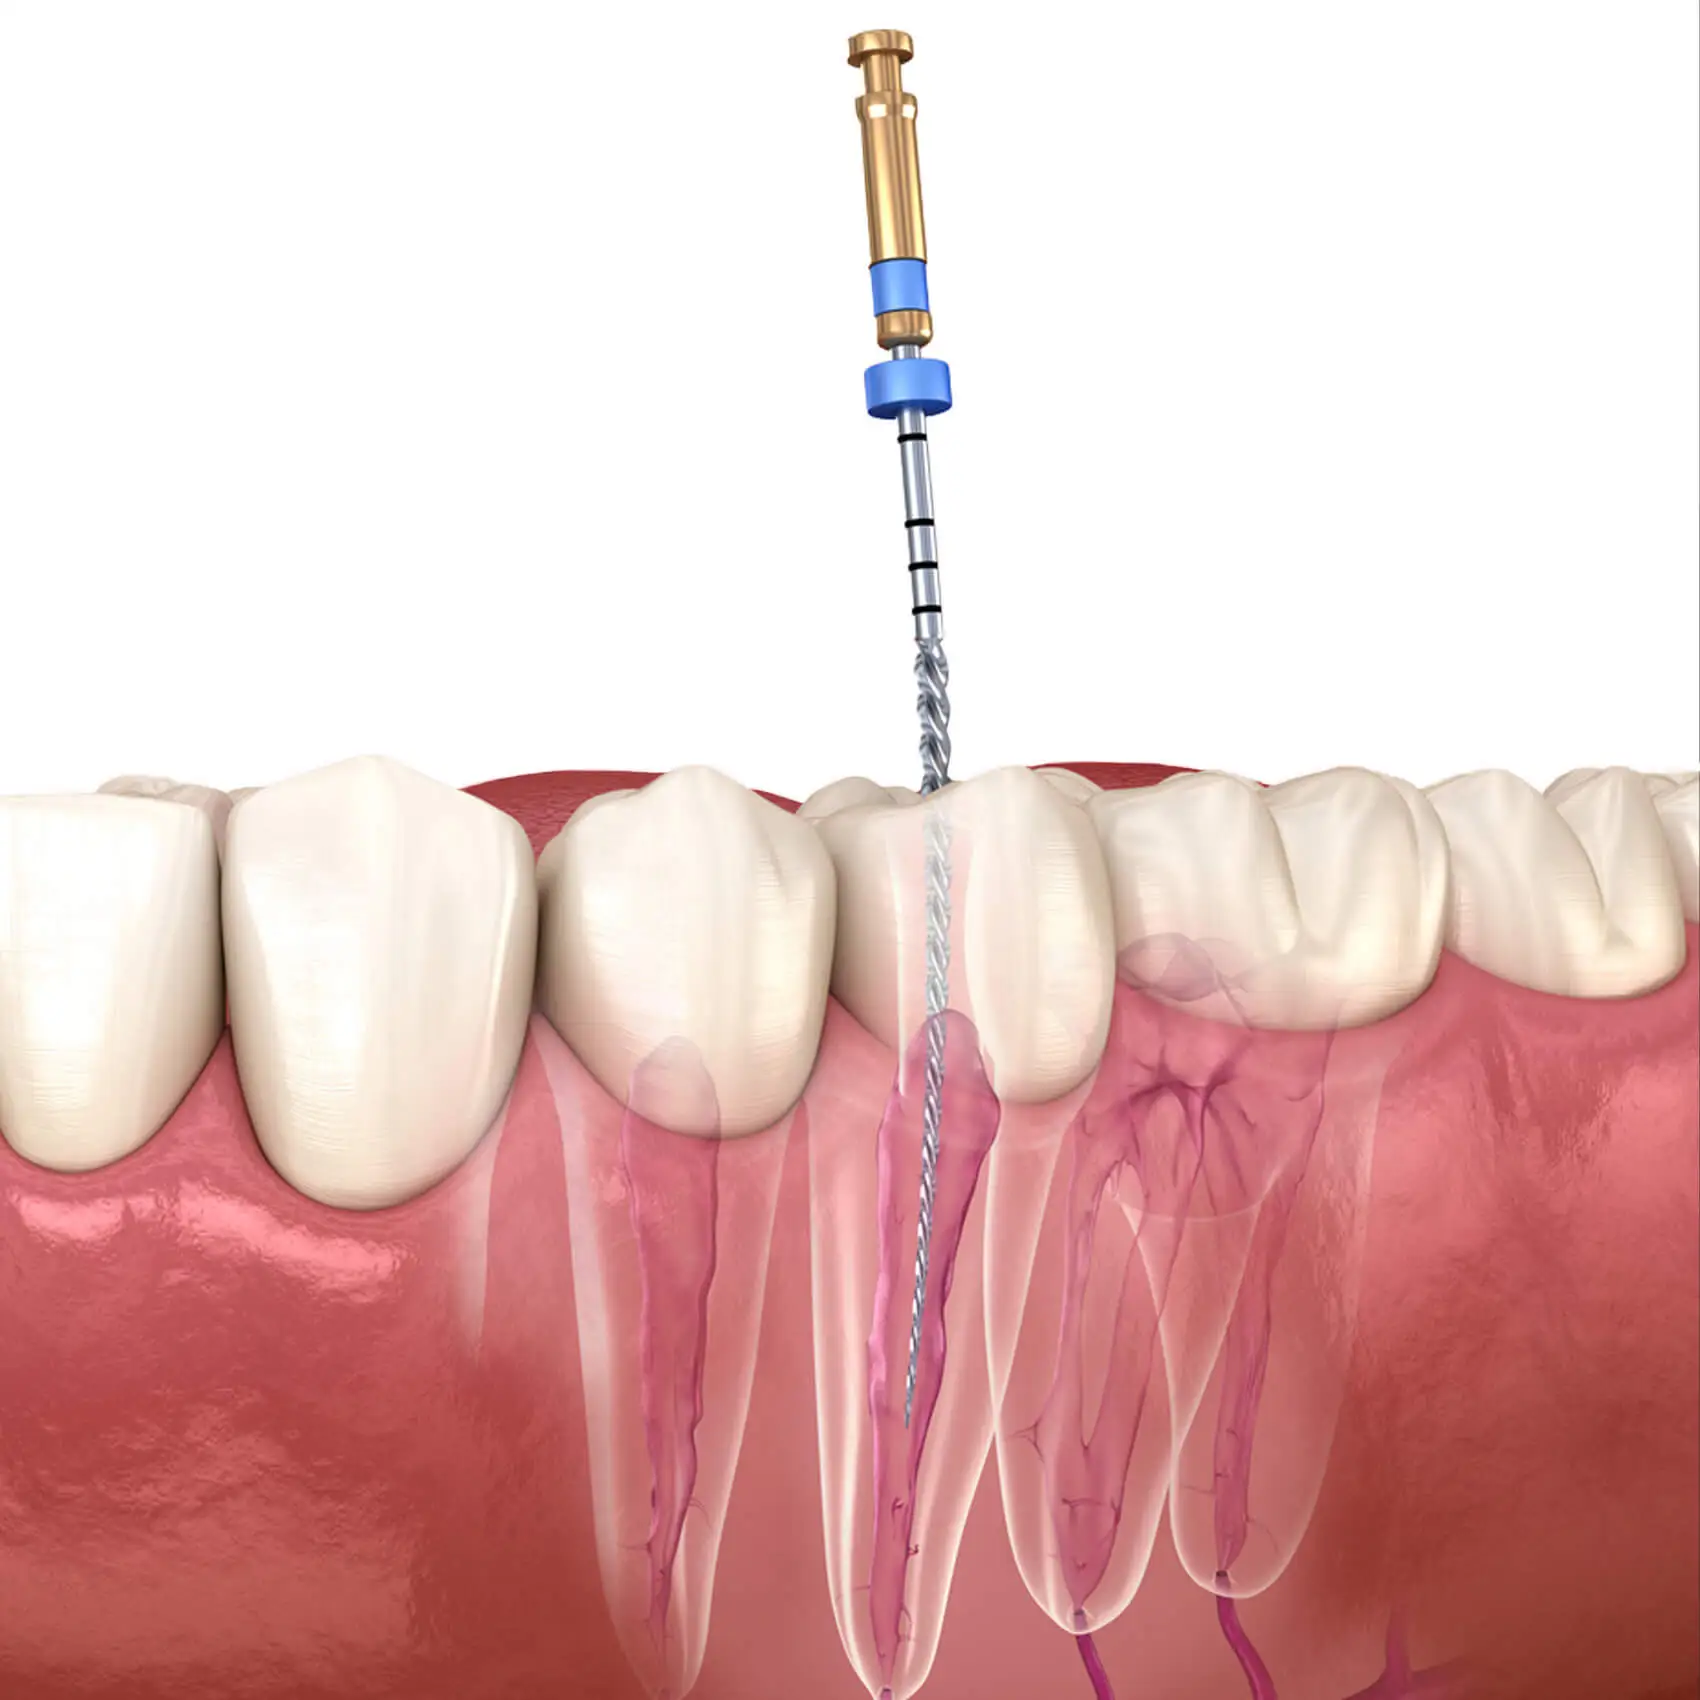 Why Choose Us for Endodontics Treatment in Istanbul, Turkey